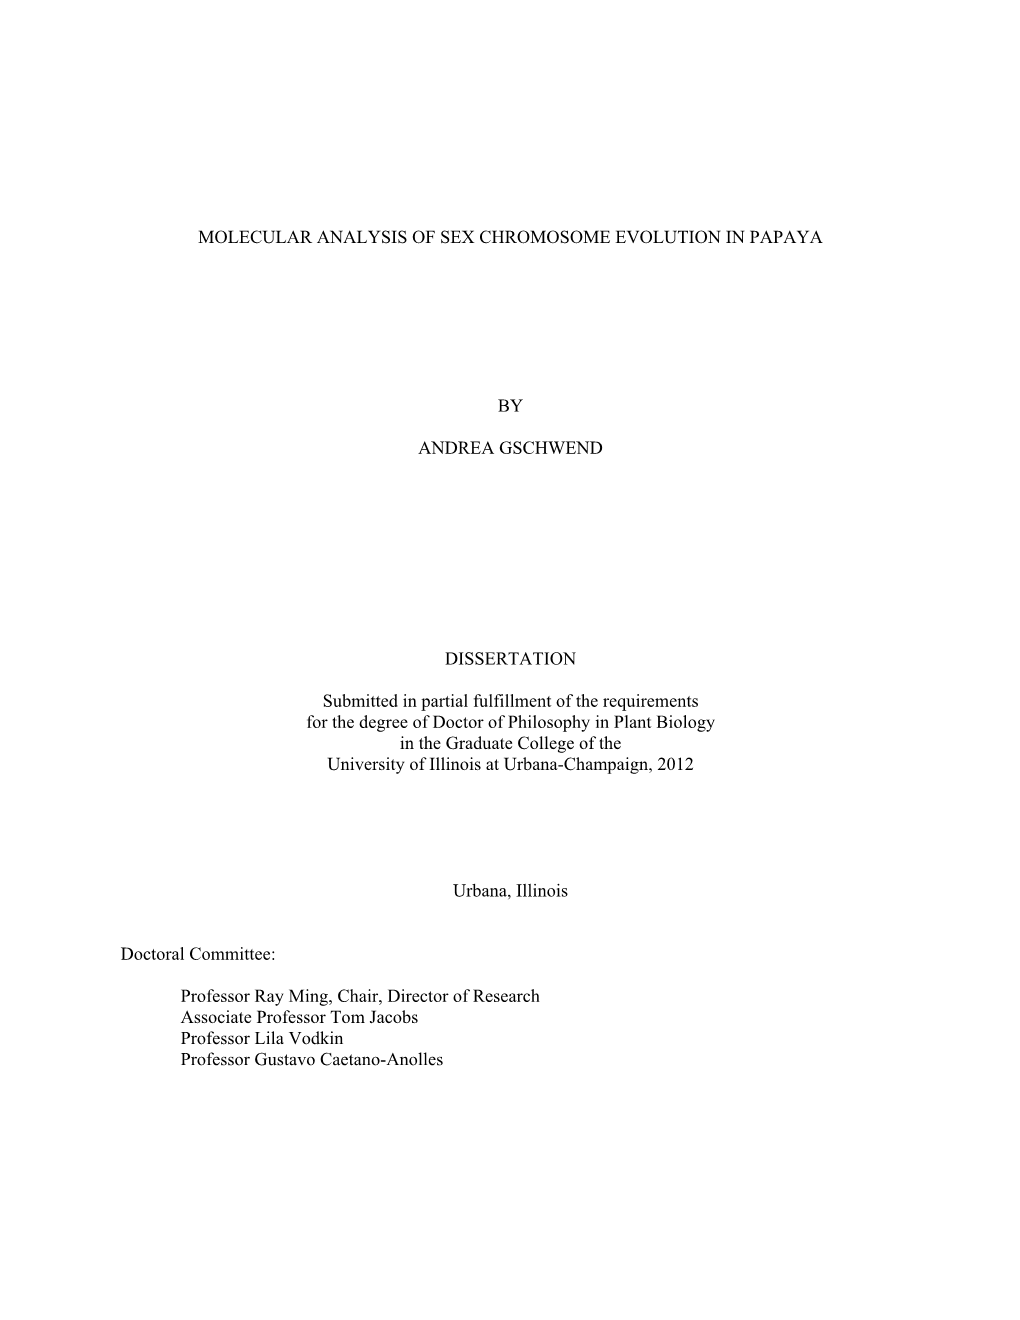 MOLECULAR ANALYSIS of SEX CHROMOSOME EVOLUTION in PAPAYA by ANDREA GSCHWEND DISSERTATION Submitted in Partial Fulfillment Of